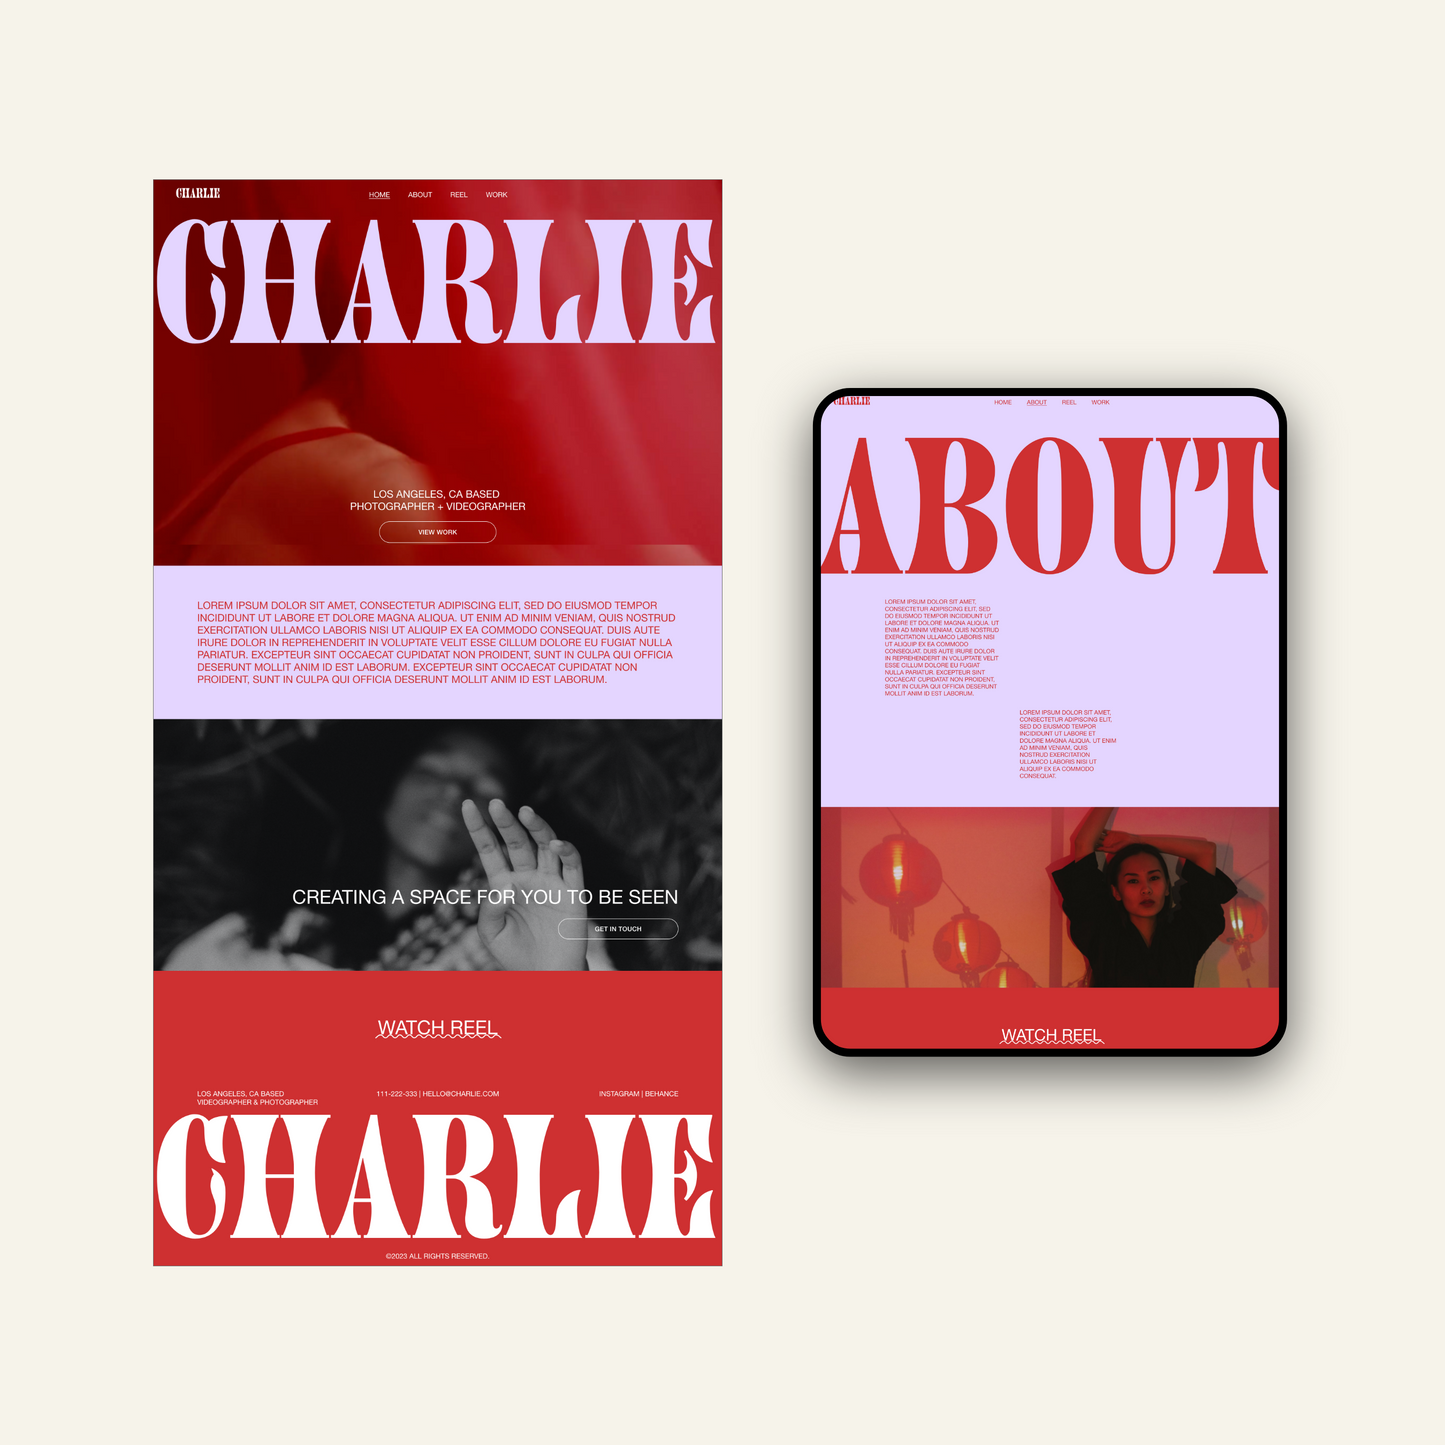 Charlie - Squarespace Website Template